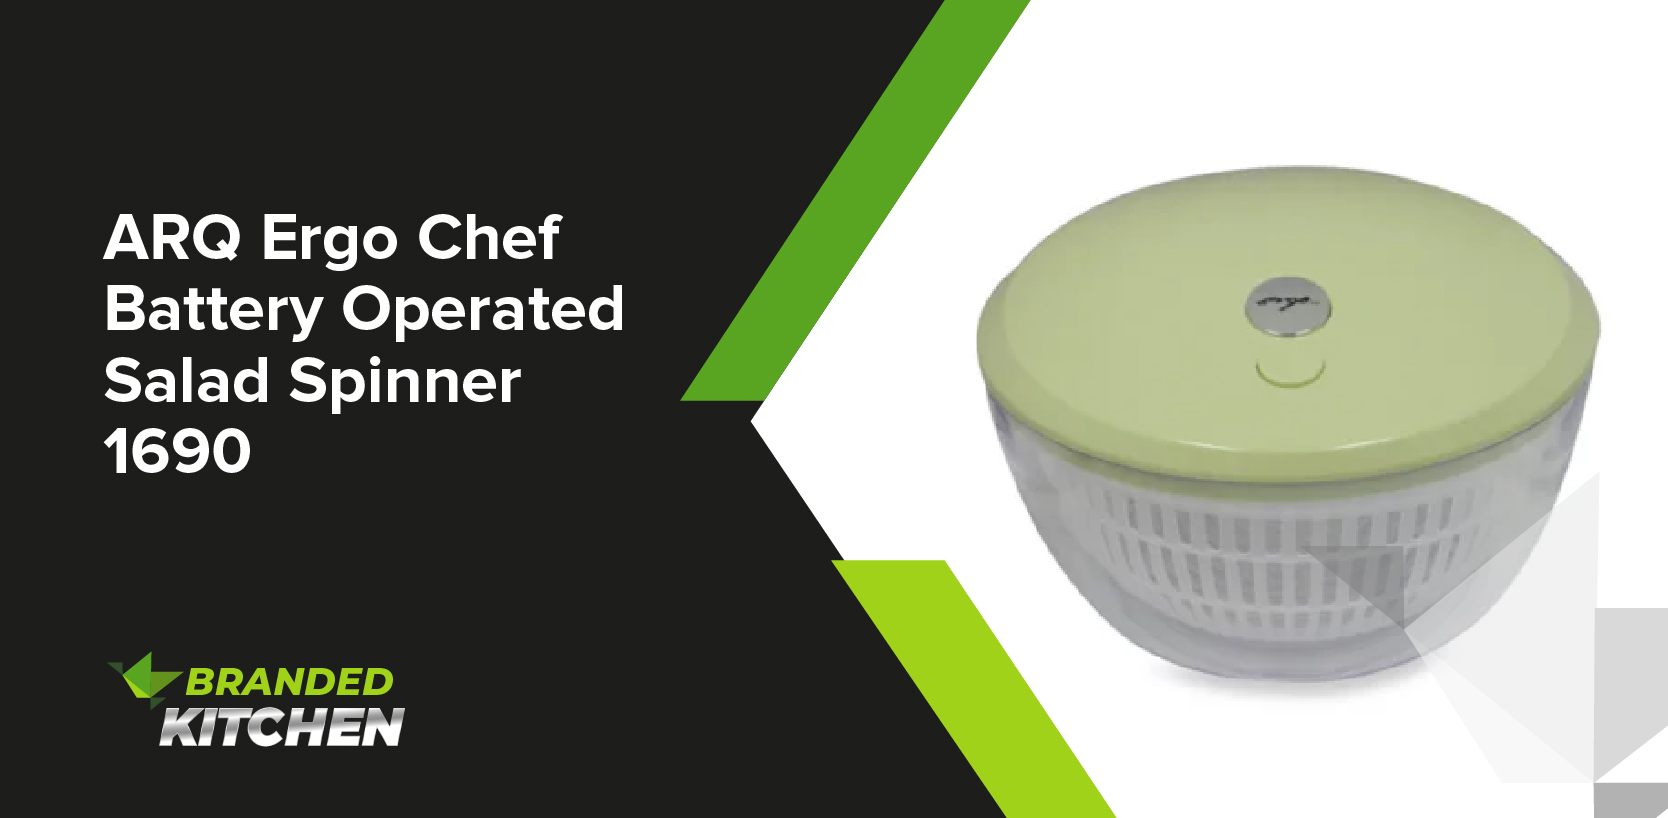 ARQ Ergo Chef Battery Operated Salad Spinner 1690